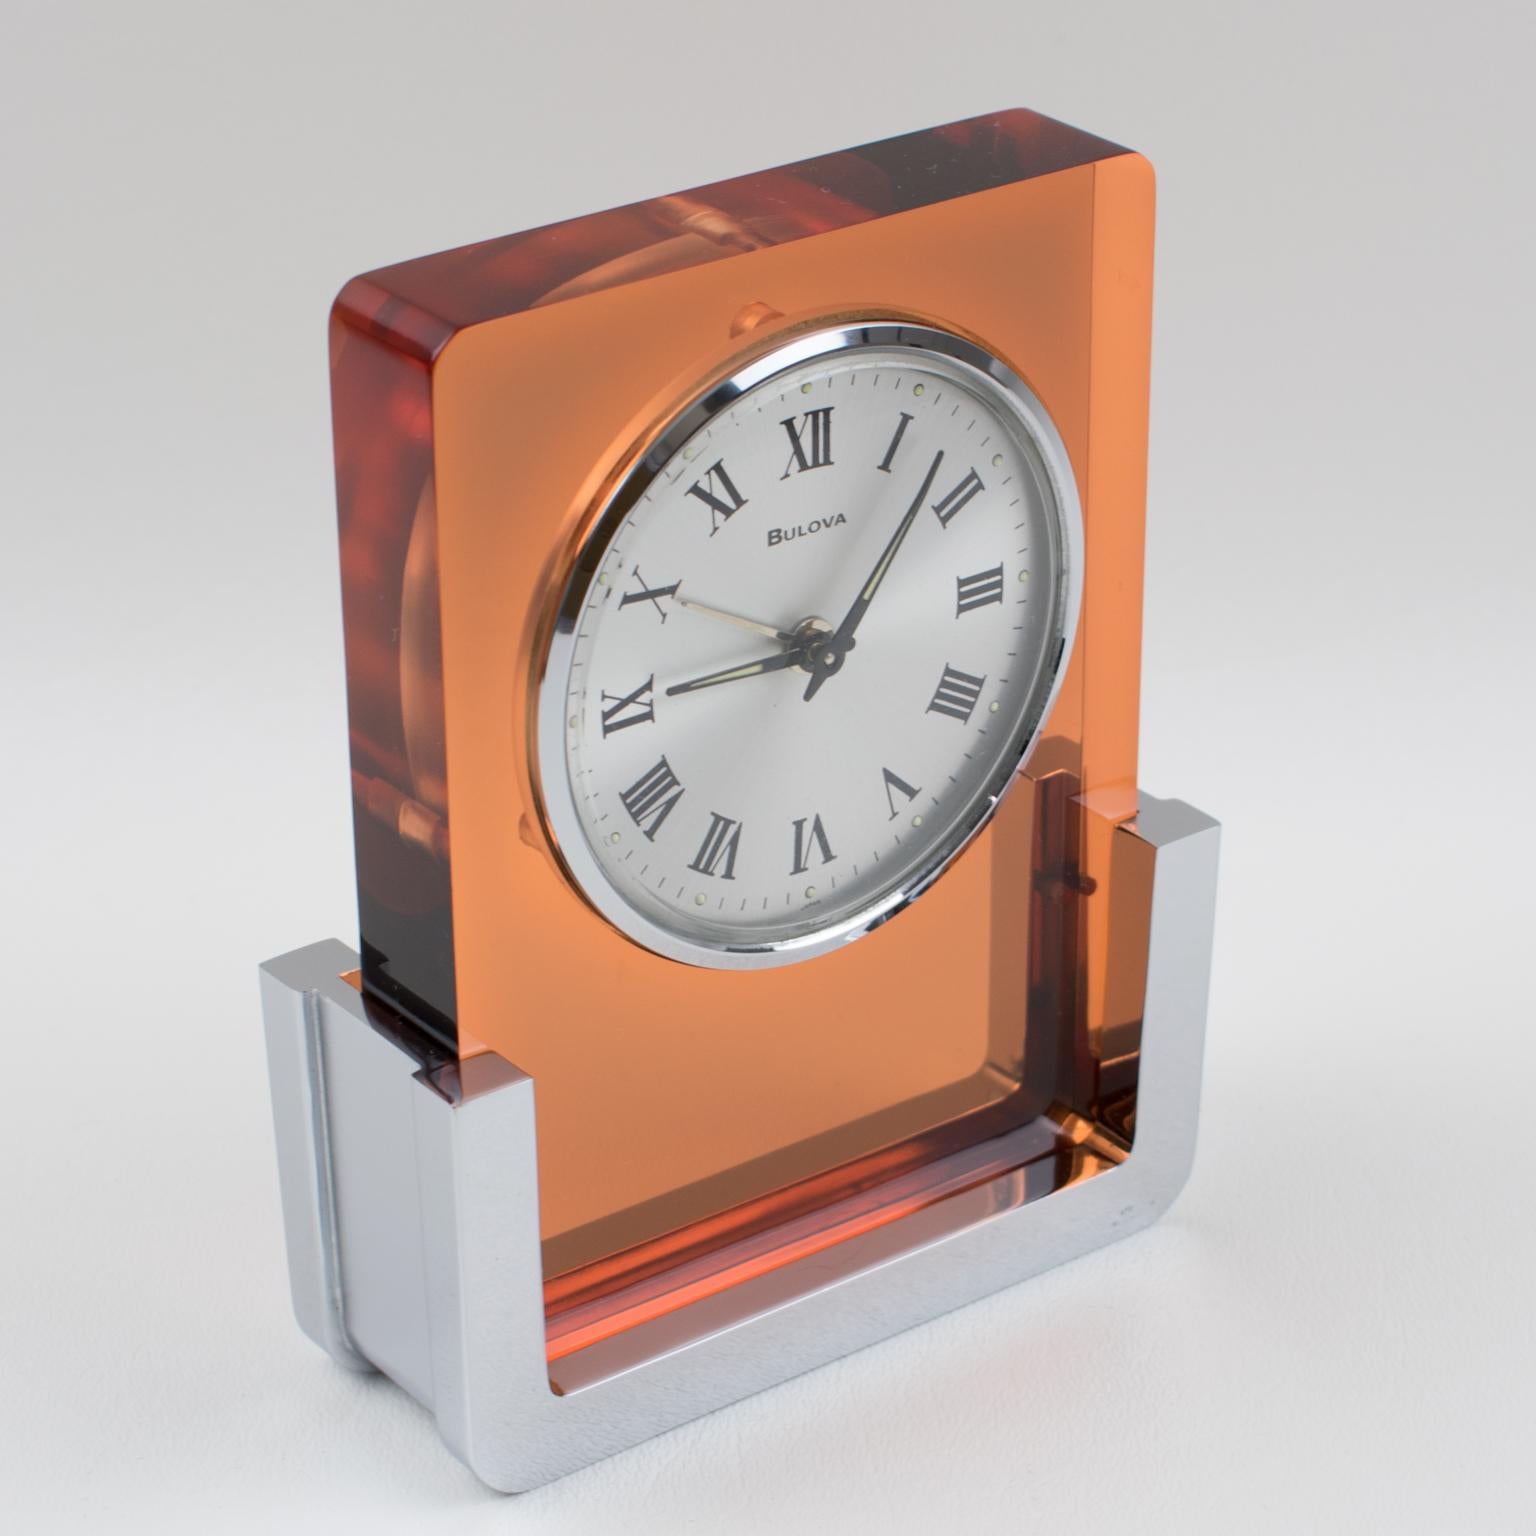 A beautiful table clock by Bulova Japan. Model 2RA007 build with transparent copper Lucite and chromed metal in a very modernist shape. This is a wind-up alarm clock, in excellent working condition, it even glows in the dark!!
Measurements: 3.94